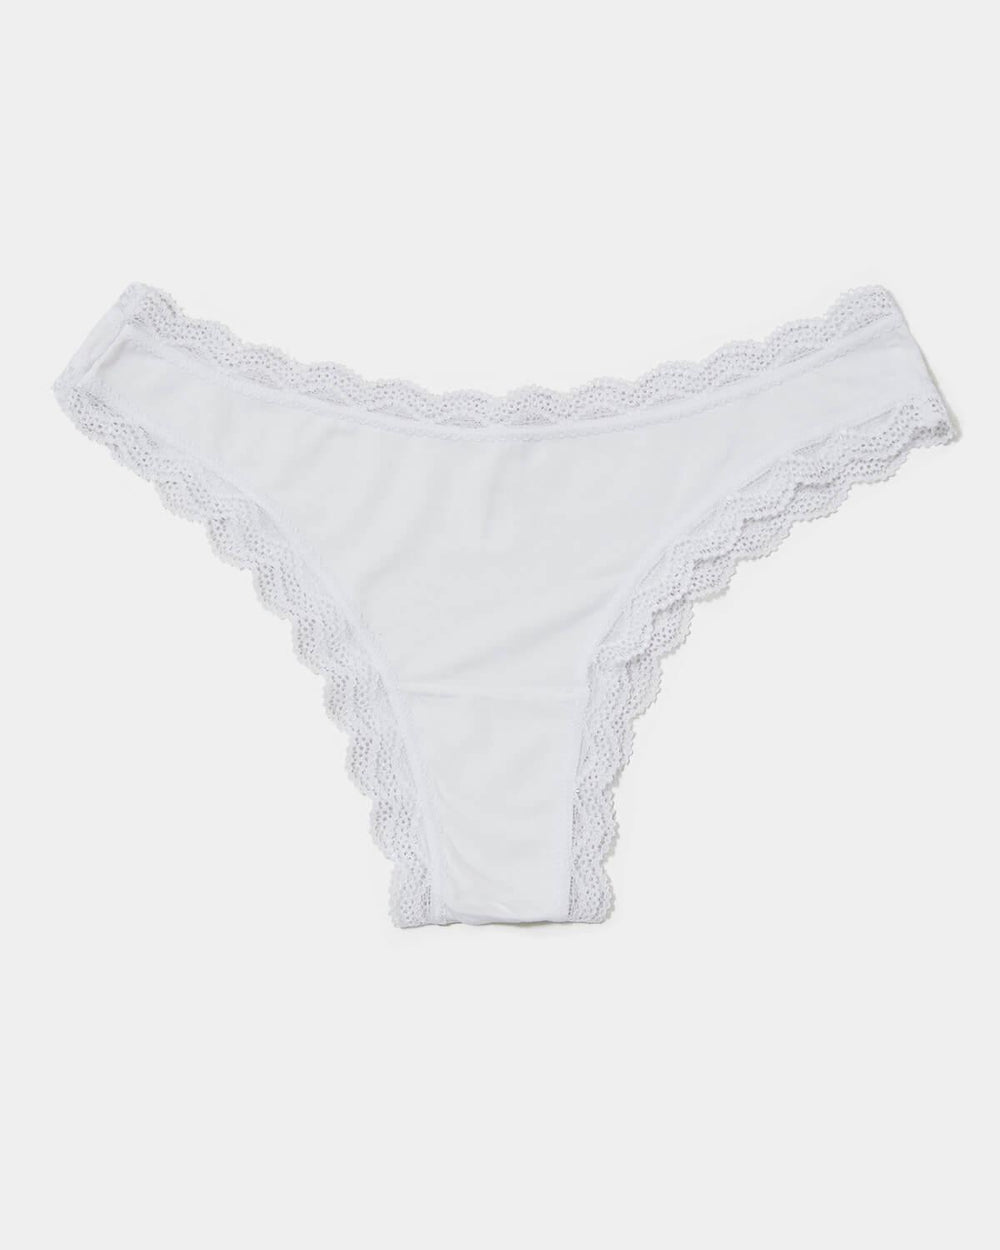 White Lace Briefs - Buy White Lace Briefs online in India